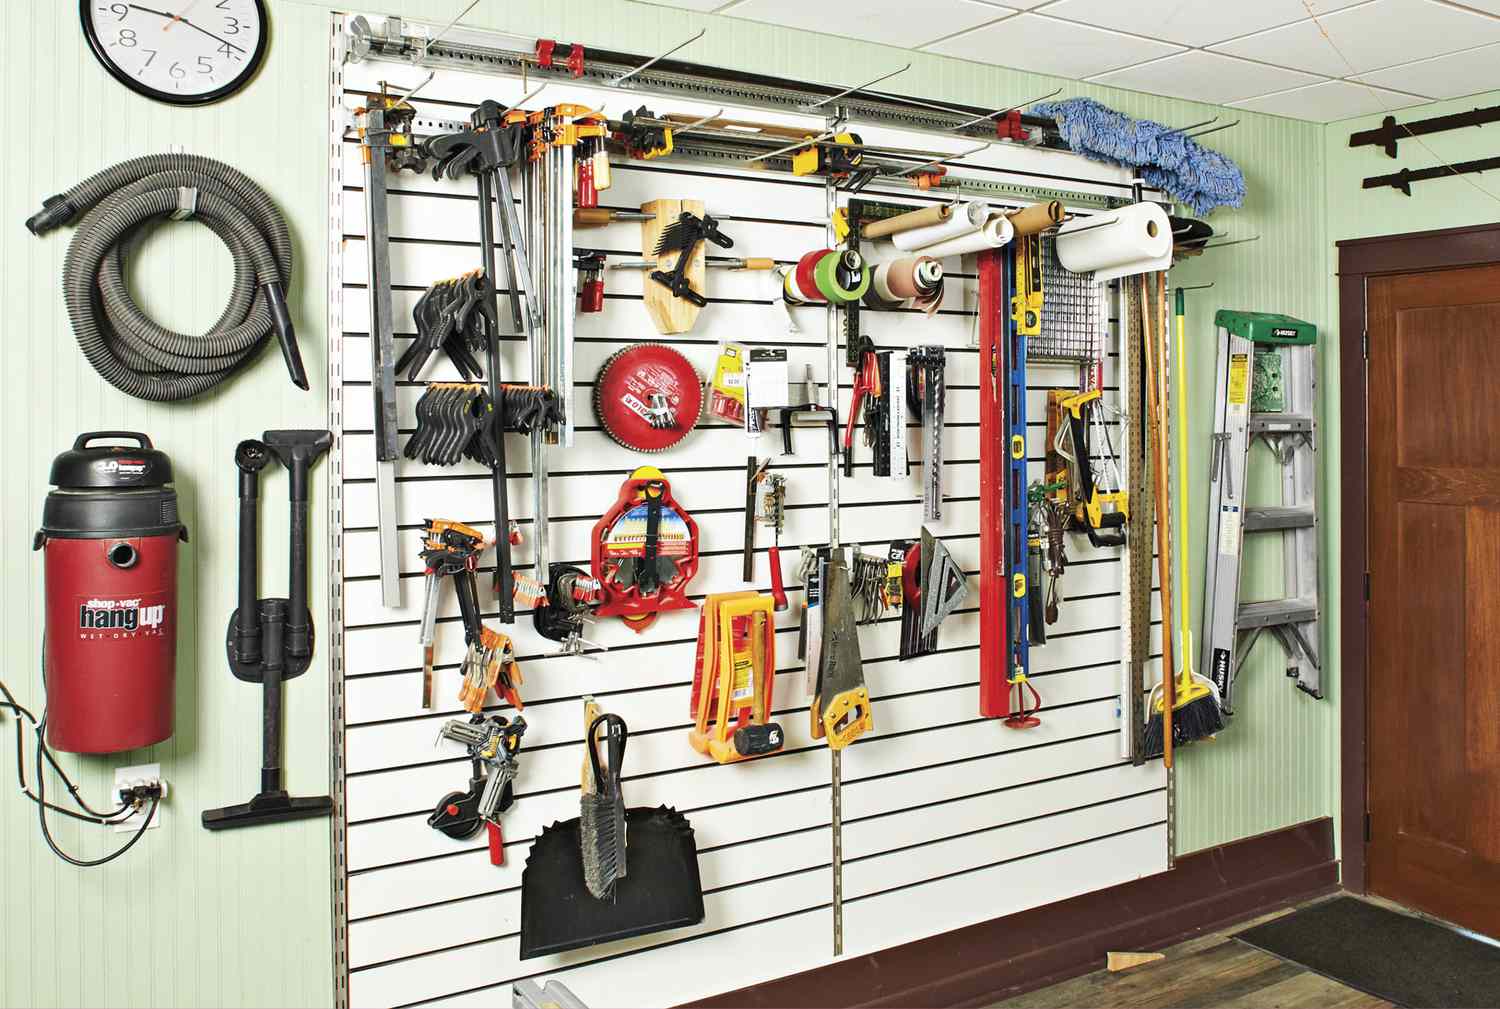 Photo of slatwall in MIke's shop